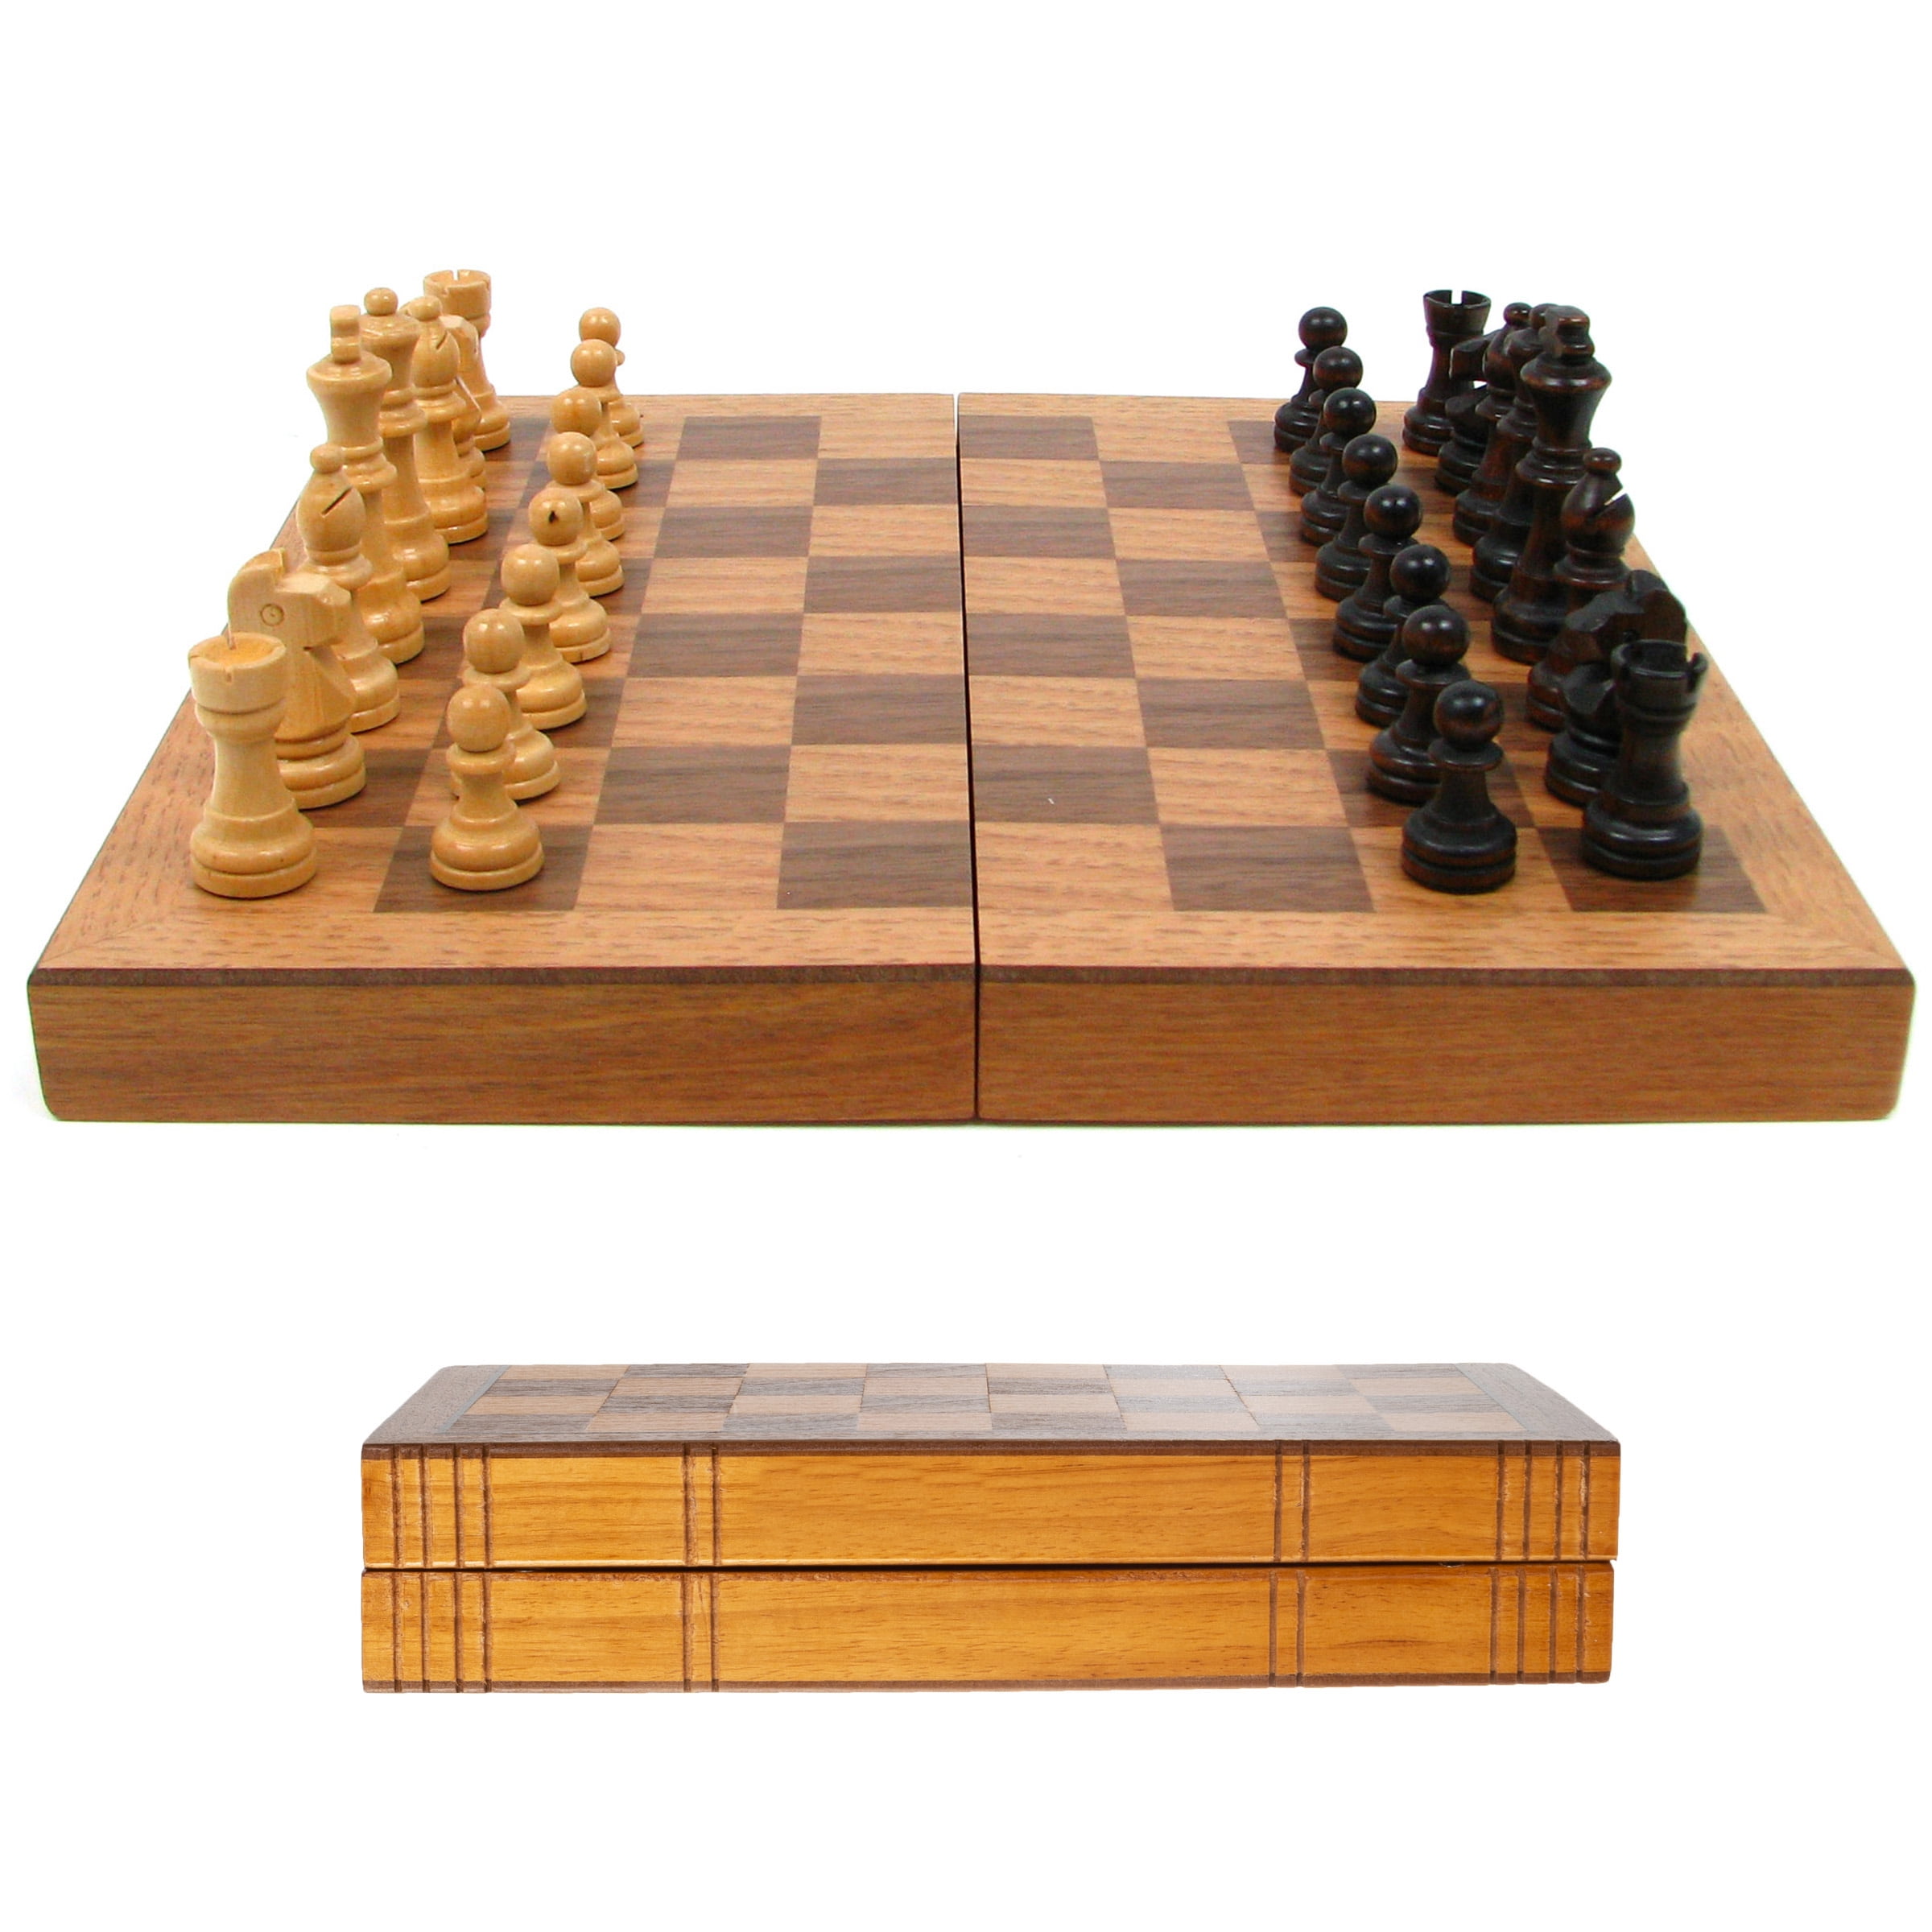 Wood Chess Magnetic Board Hand Crafted Folding Chessboard Portable Travel Game J 